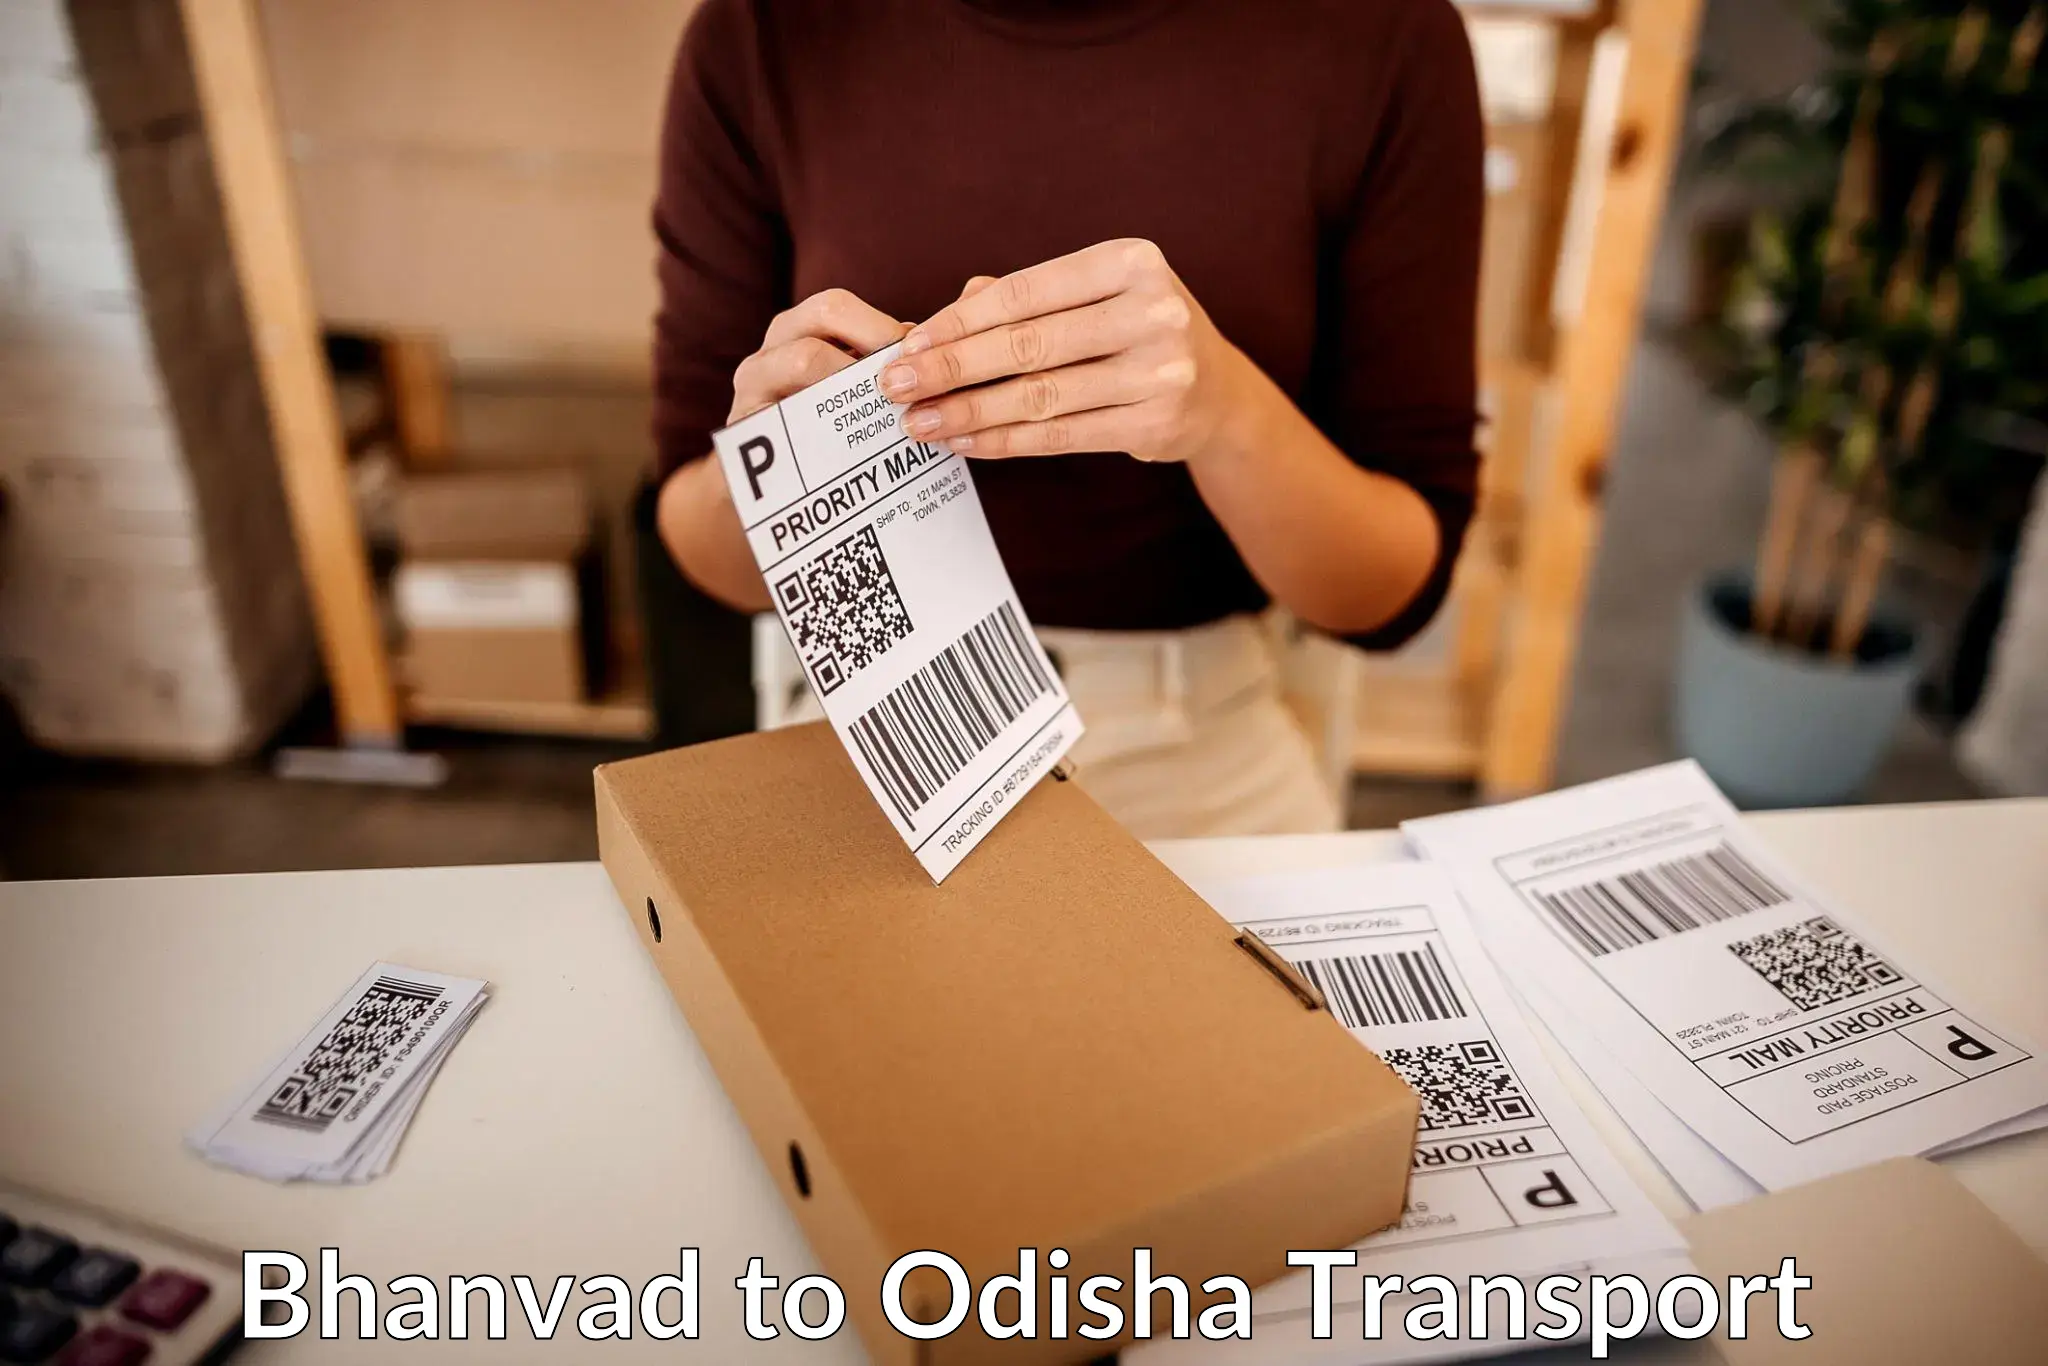 Delivery service Bhanvad to Bhubaneswar